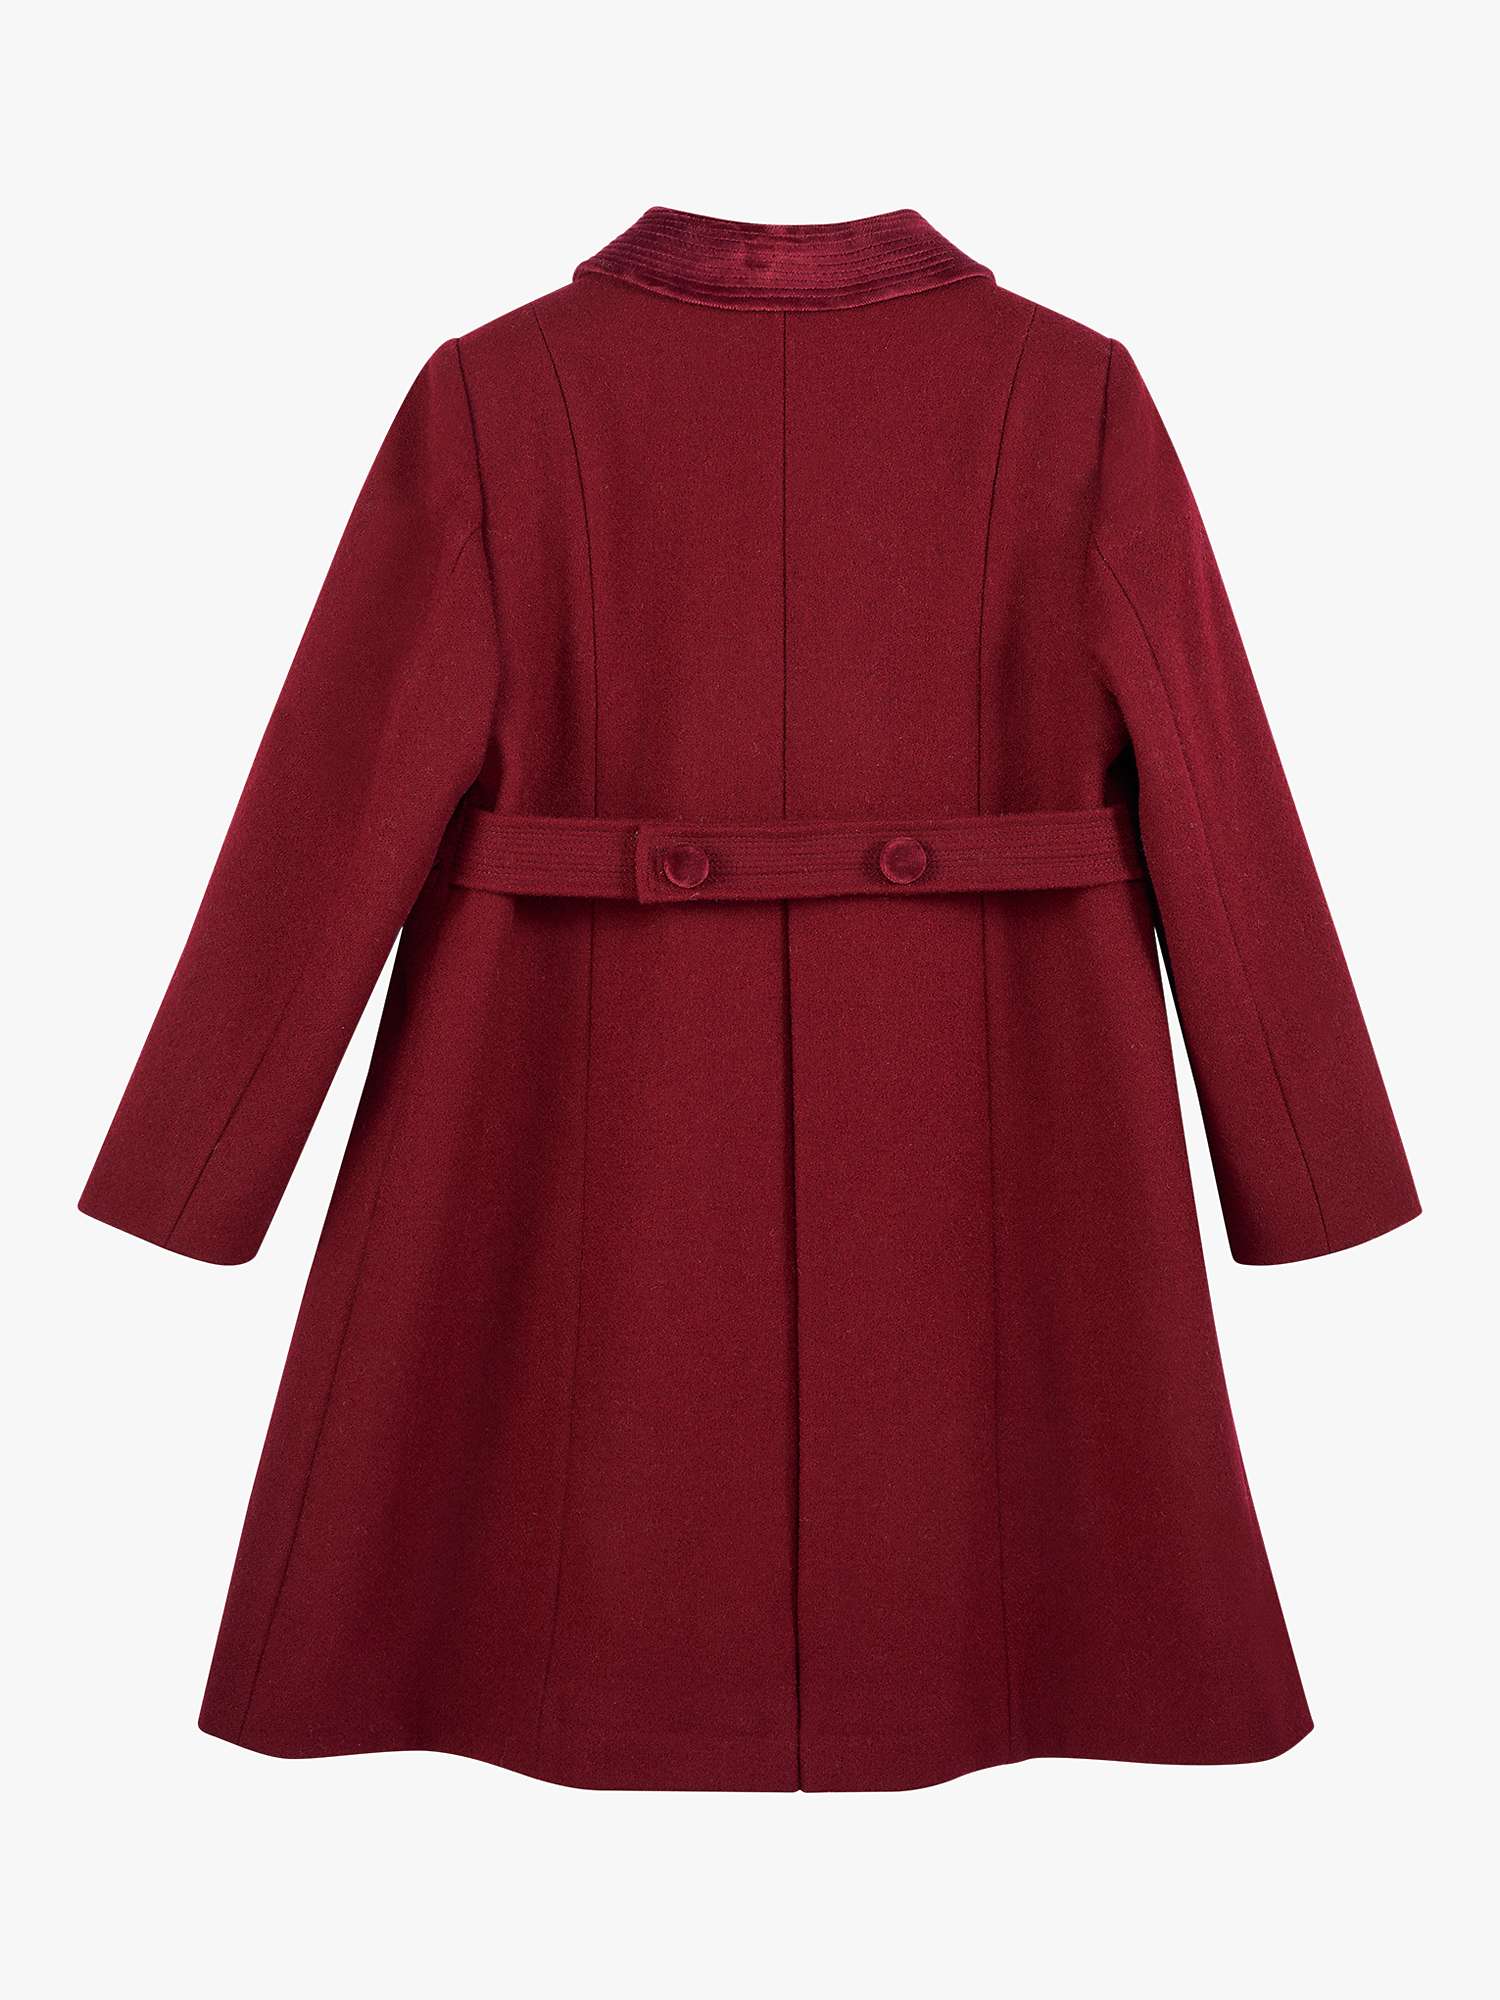 Buy Trotters Kids' Classic Double Breasted Coat, Burgundy Online at johnlewis.com